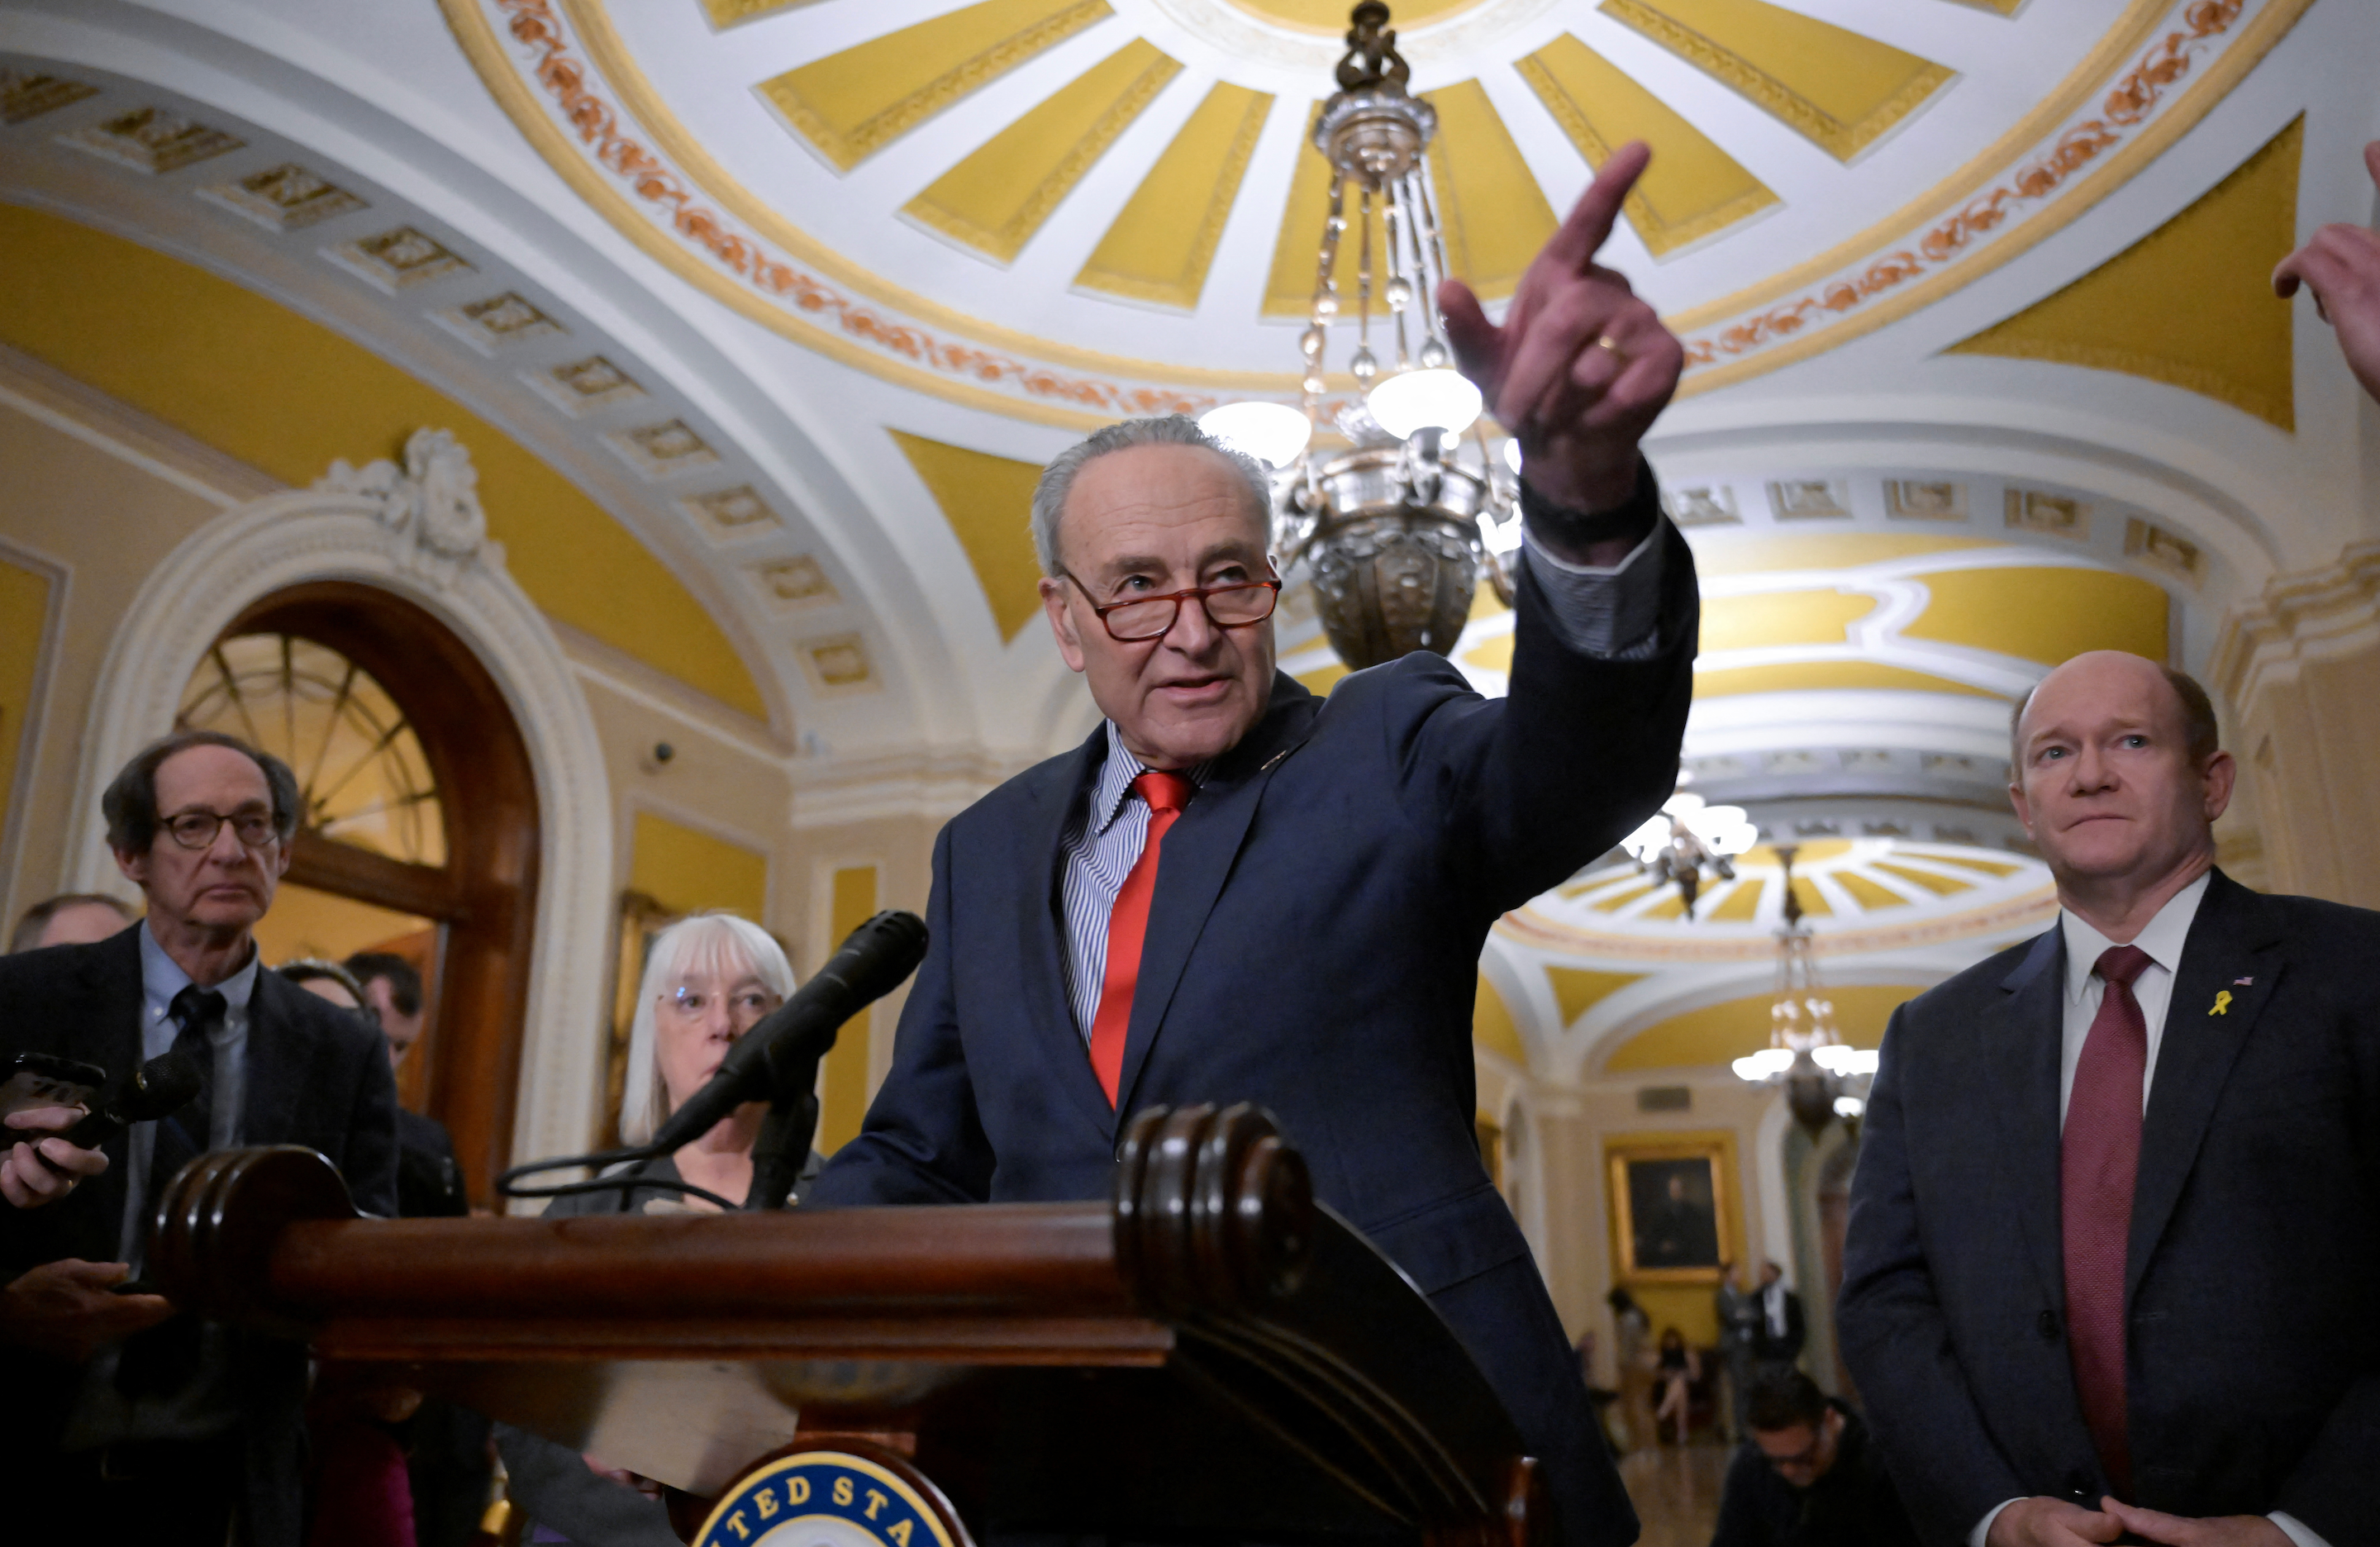 Schumer says Netanyahu "no longer fits the needs of Israel”, calls for elections